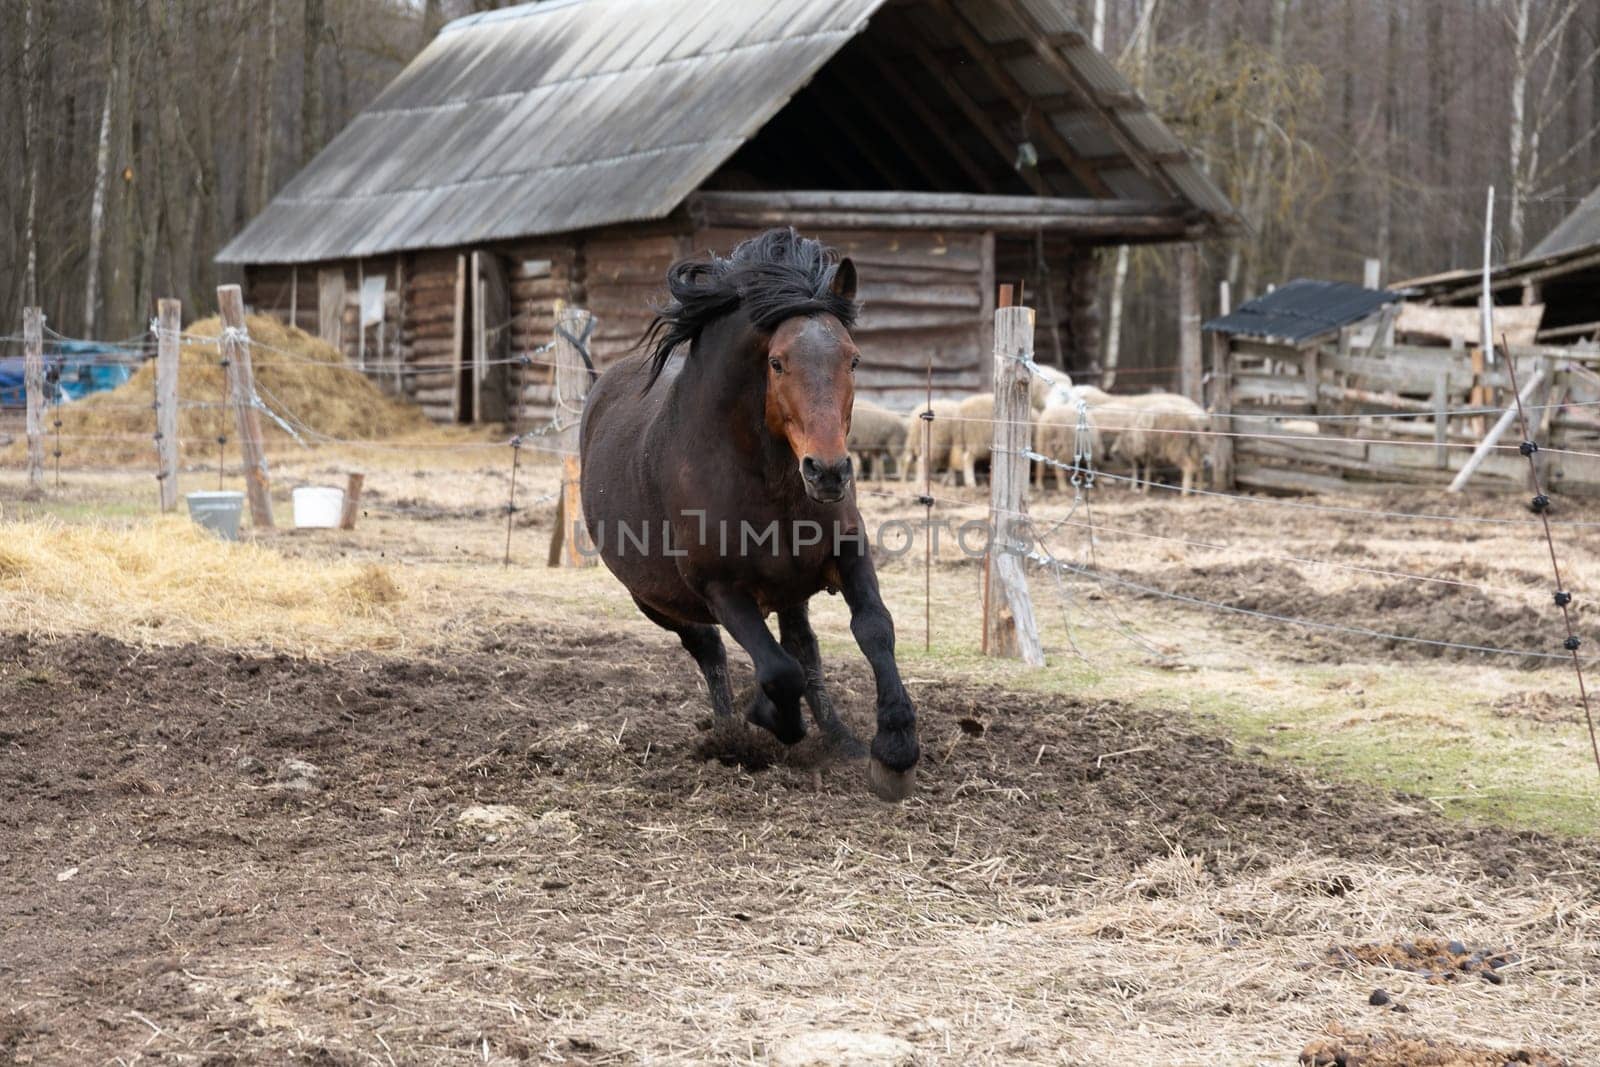 Horse Running in Field With Barn in Background by TRMK